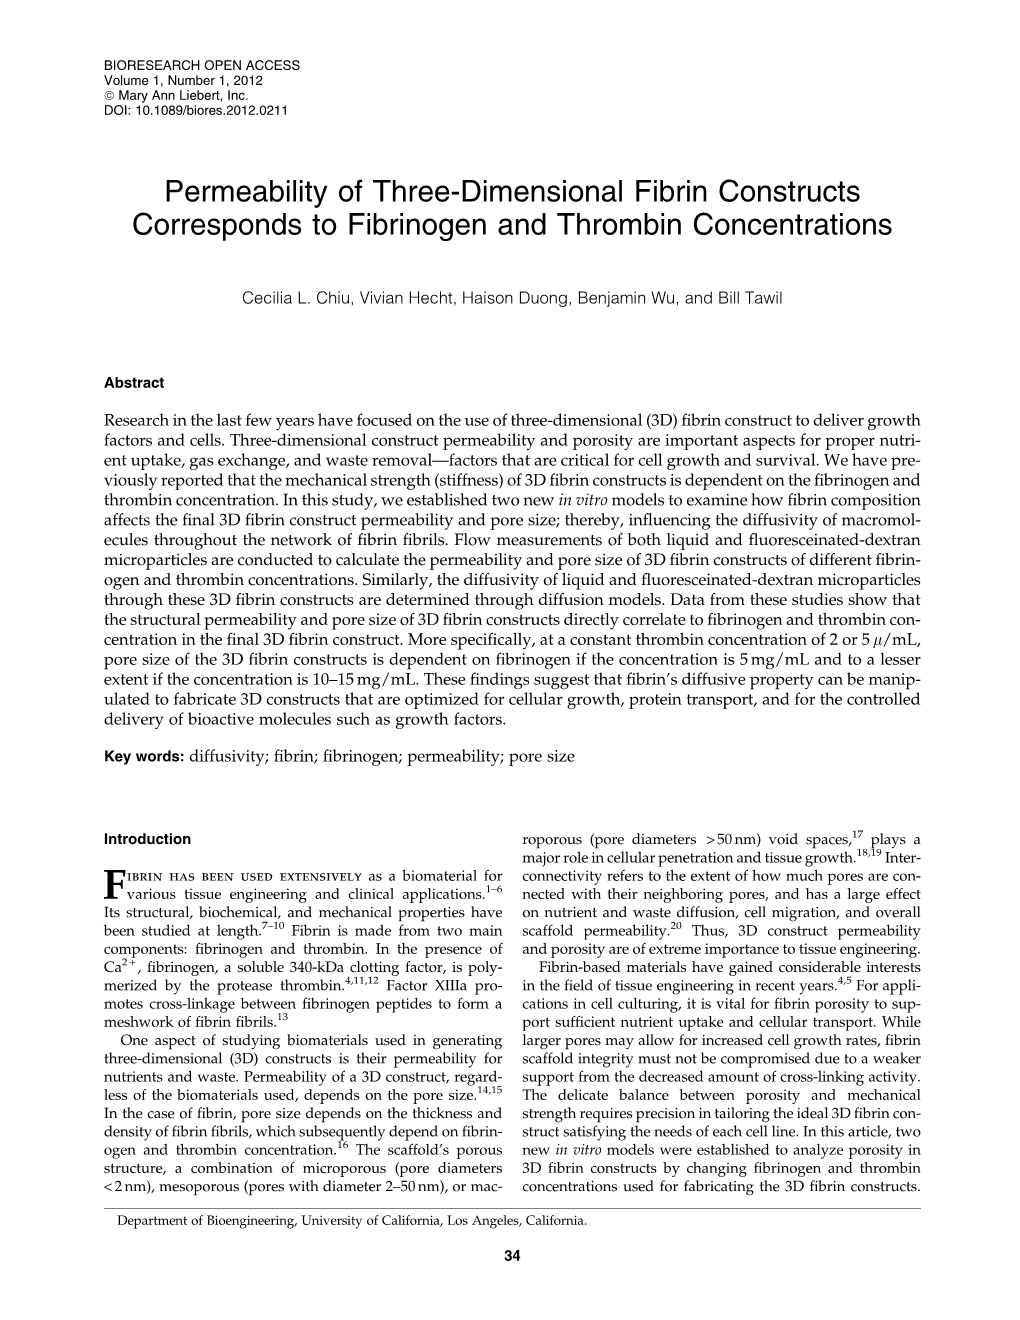 Permeability of Three-Dimensional Fibrin Constructs Corresponds to Fibrinogen and Thrombin Concentrations